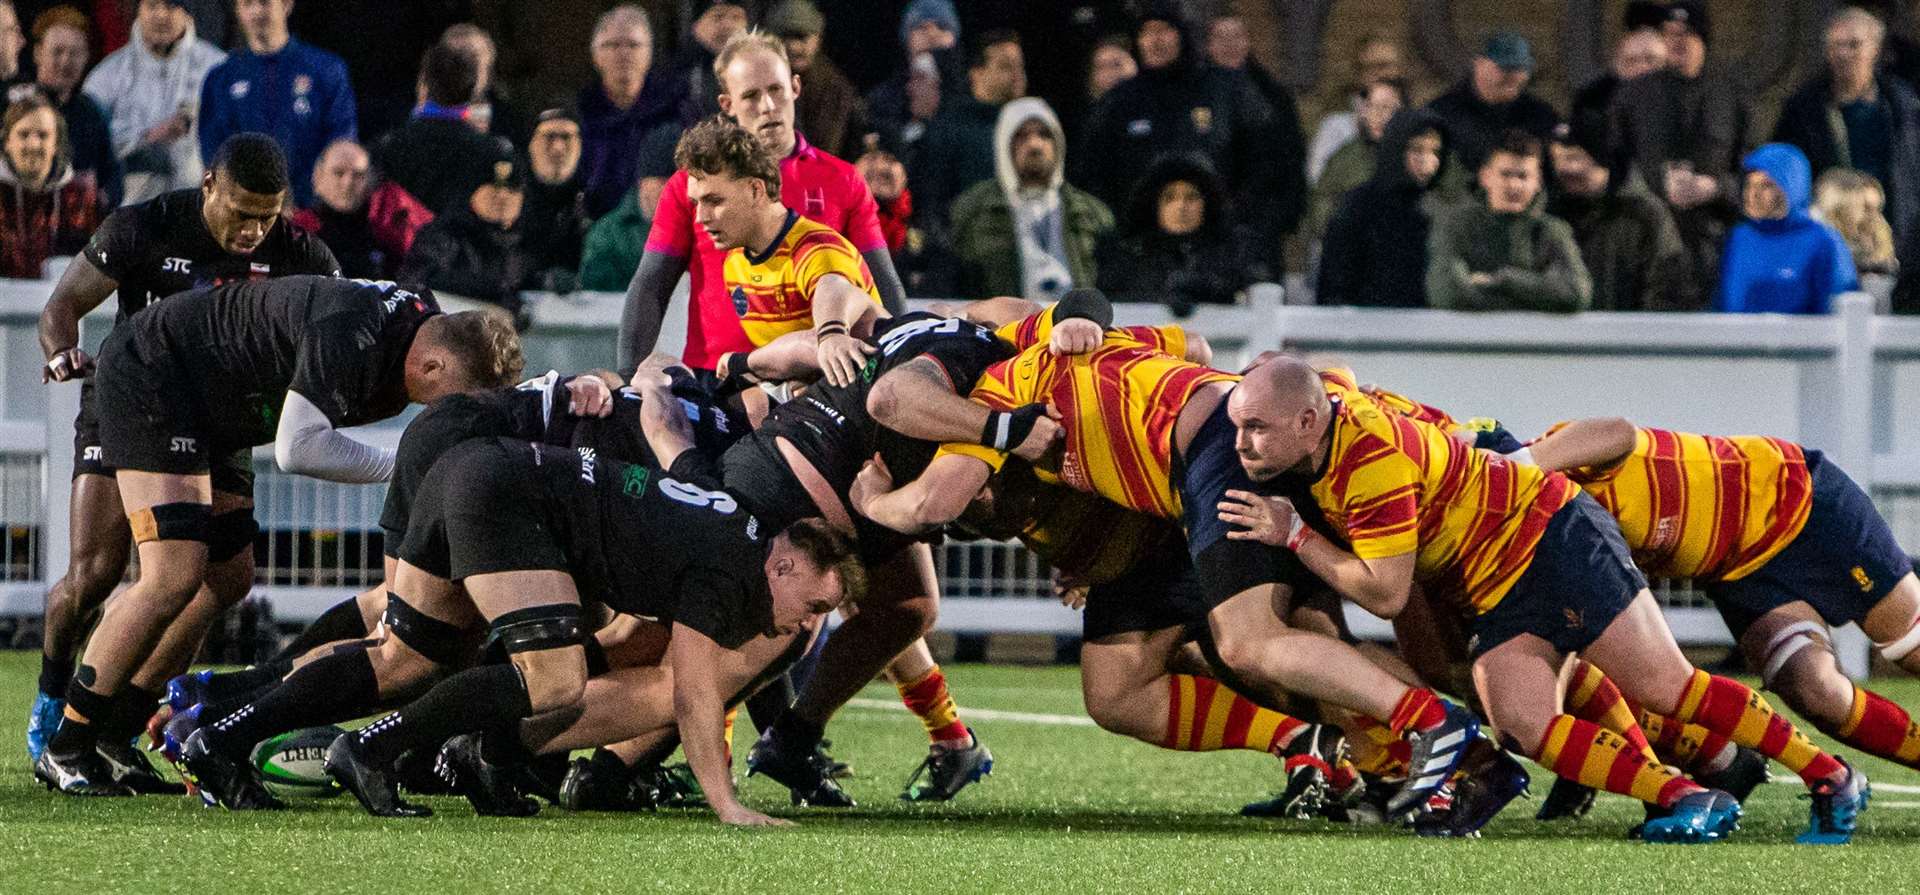 Medway dominate at the scrum against Colchester. Picture: Jake Miles Sports Photography